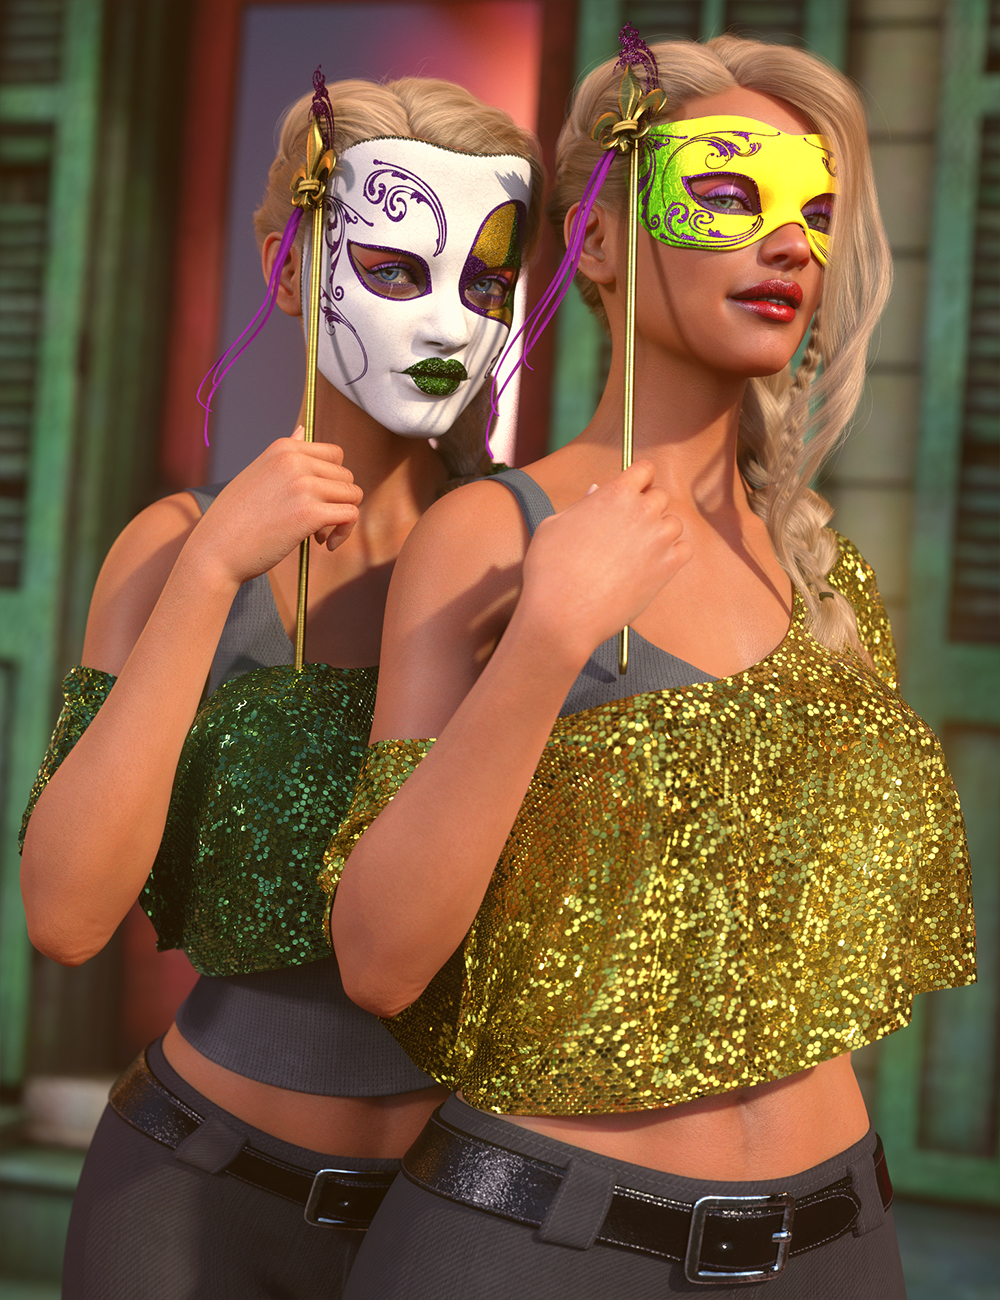 Fun Mardi Gras Mix and Match Accessories for Genesis 8 and 8.1 Bundle